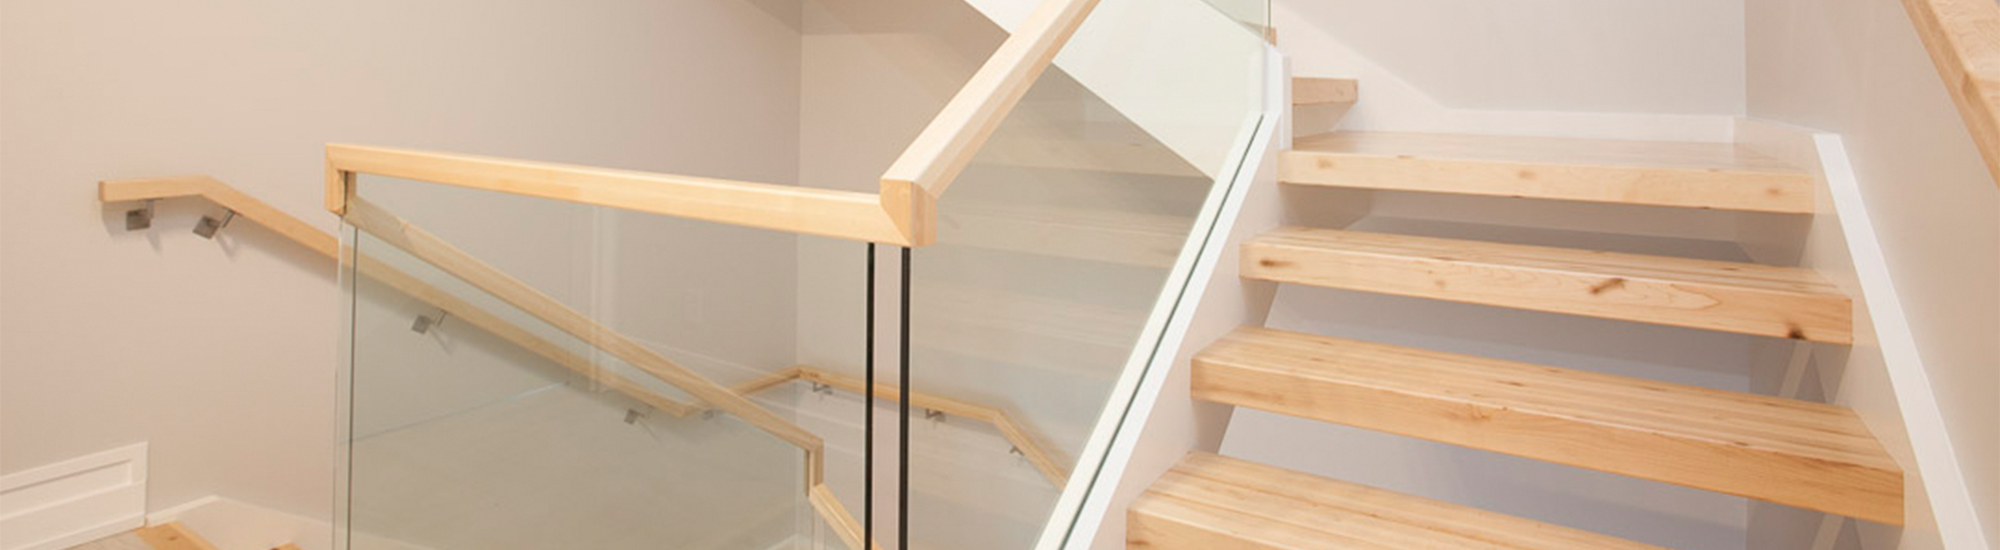 Stairs and Railings Project by Accurate Stairs